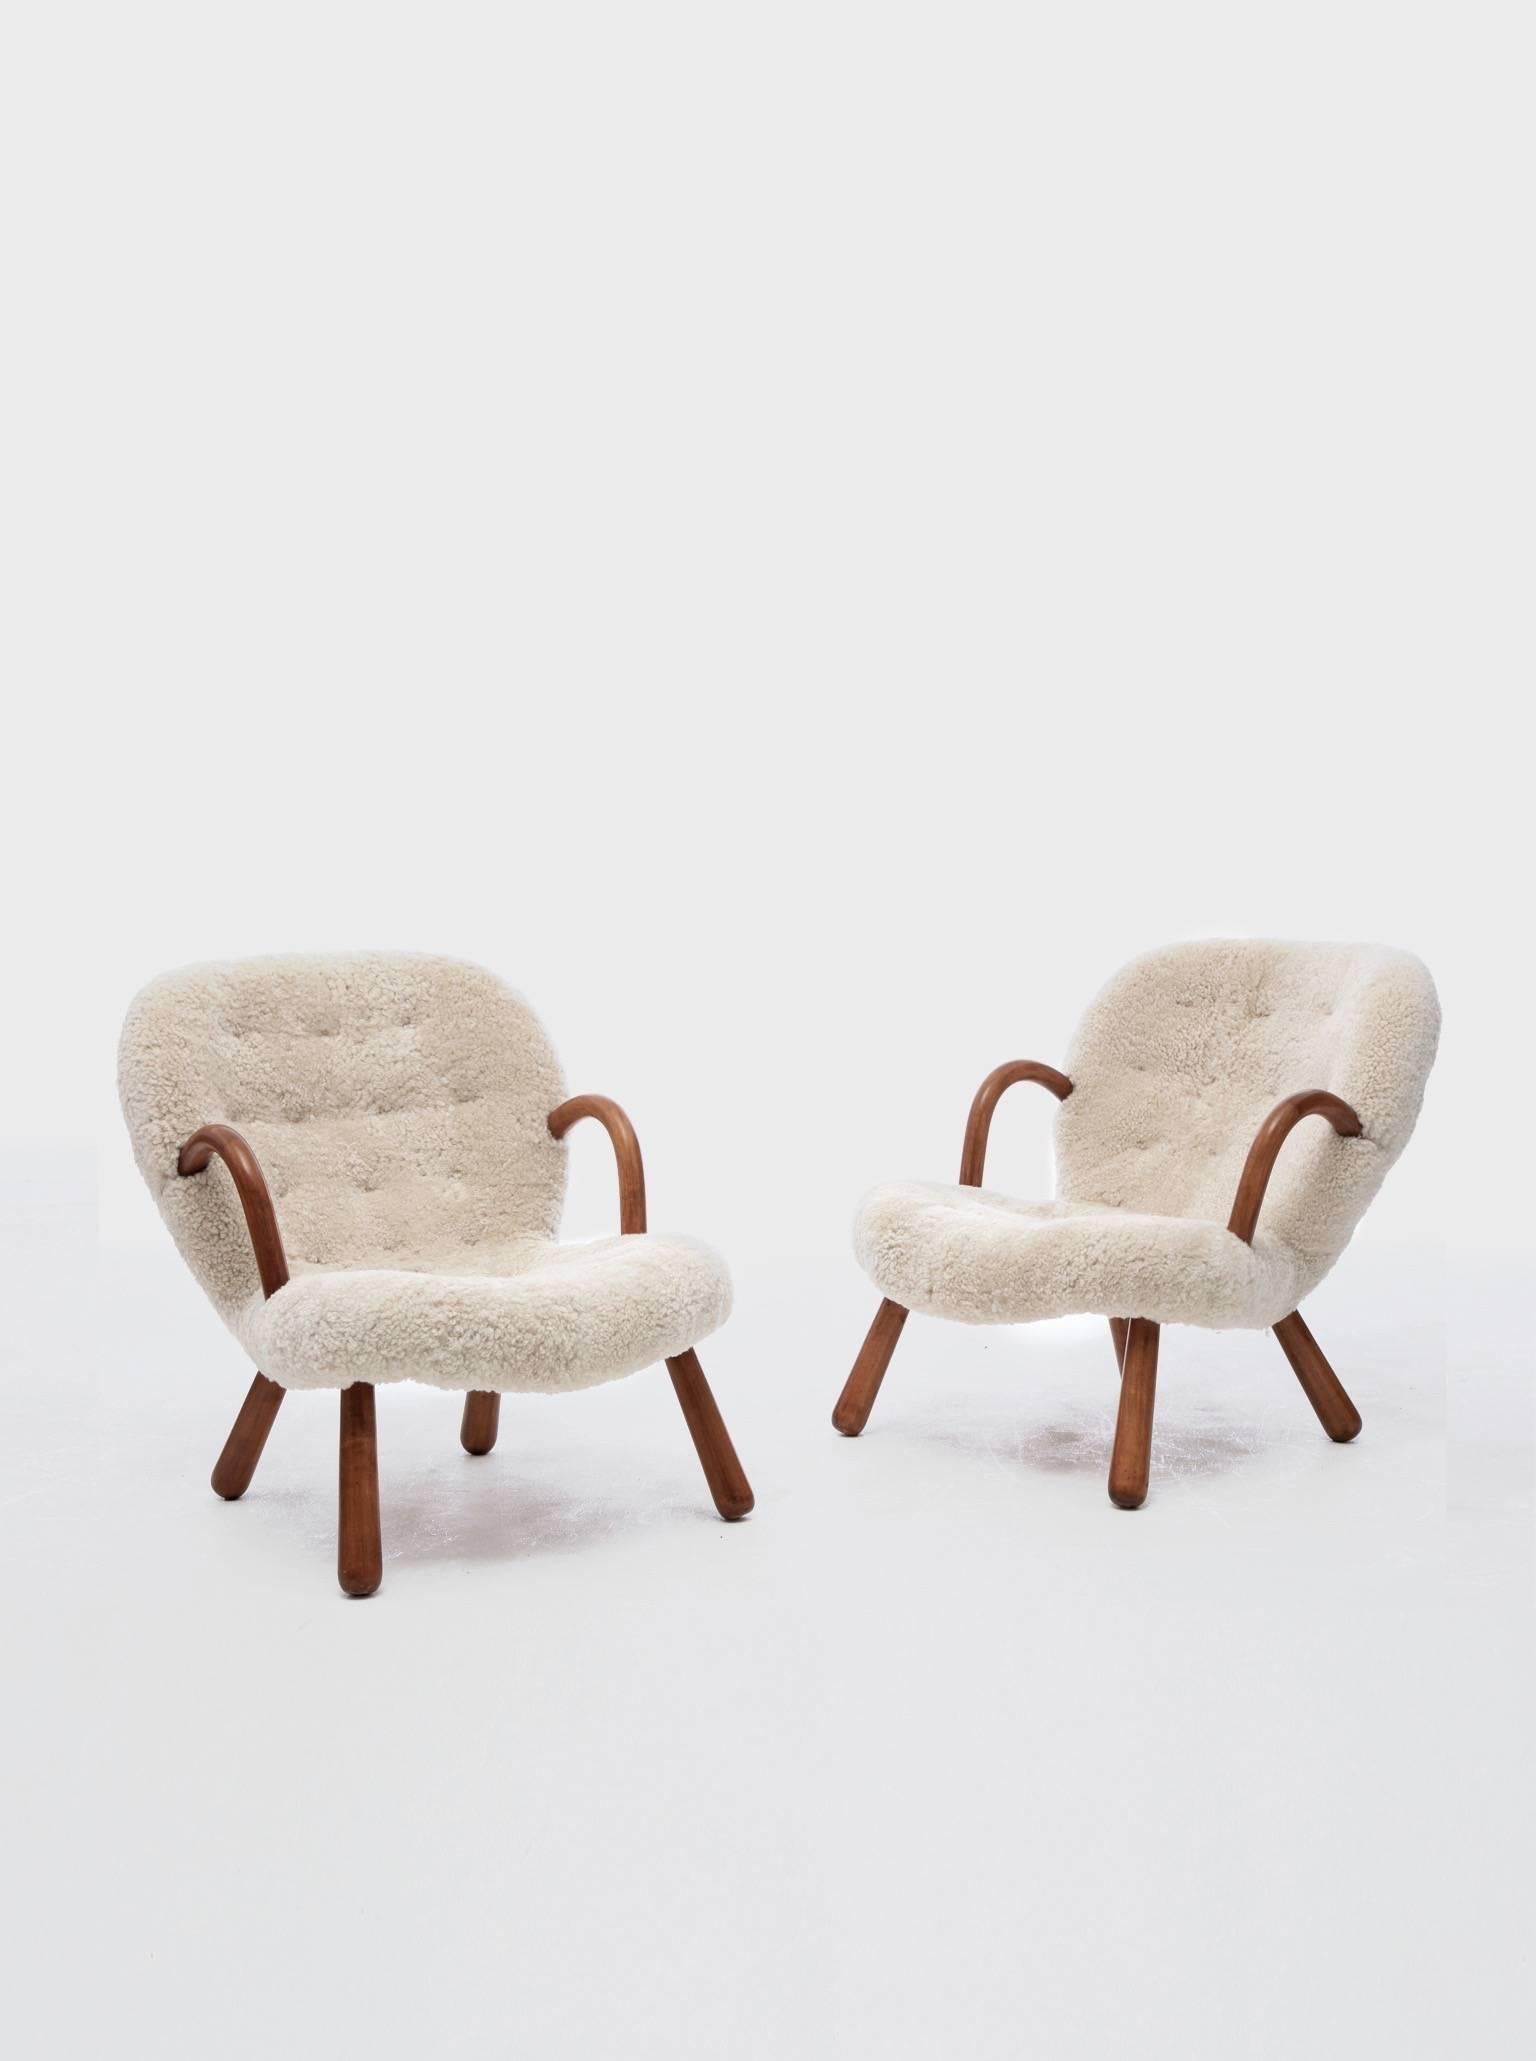 An authentic pair of clam armchairs designed by Philip Arctander with arms and legs of stained beech and reupholstered in sheepskin. Designed in 1944. Ships worldwide. **complimentary US shipping during January**
       
    